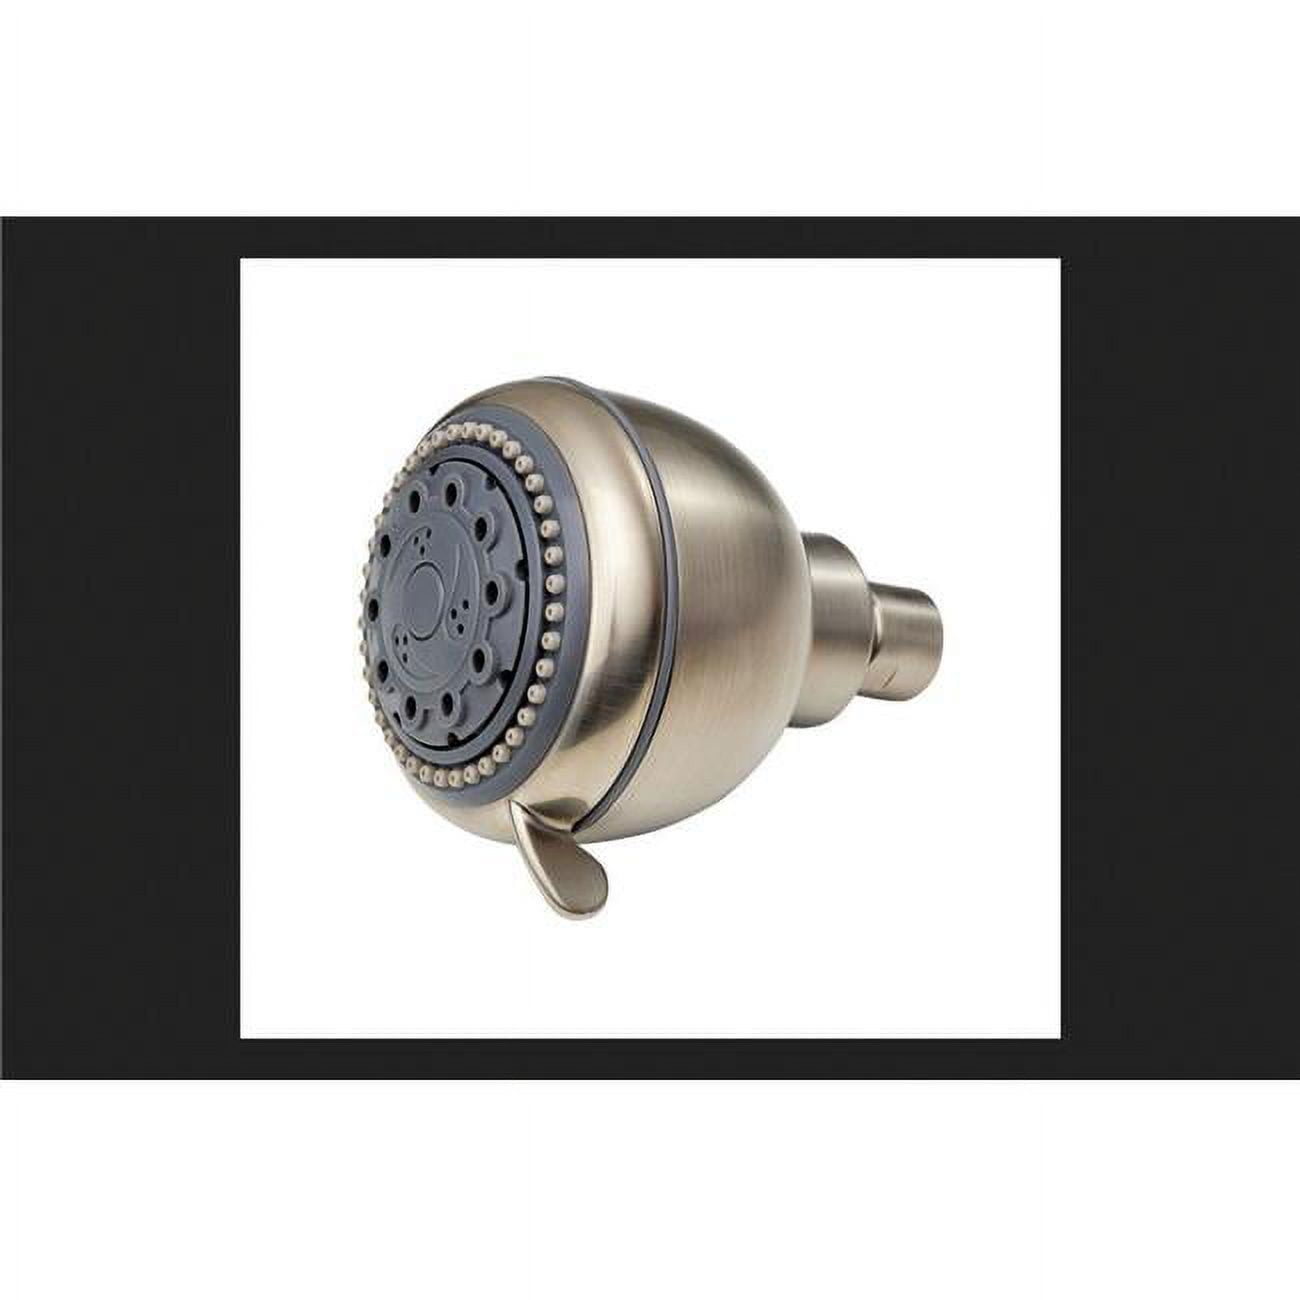 Whedon Fp58c 5 Spray Champagne Shower Head, Brushed Nickel